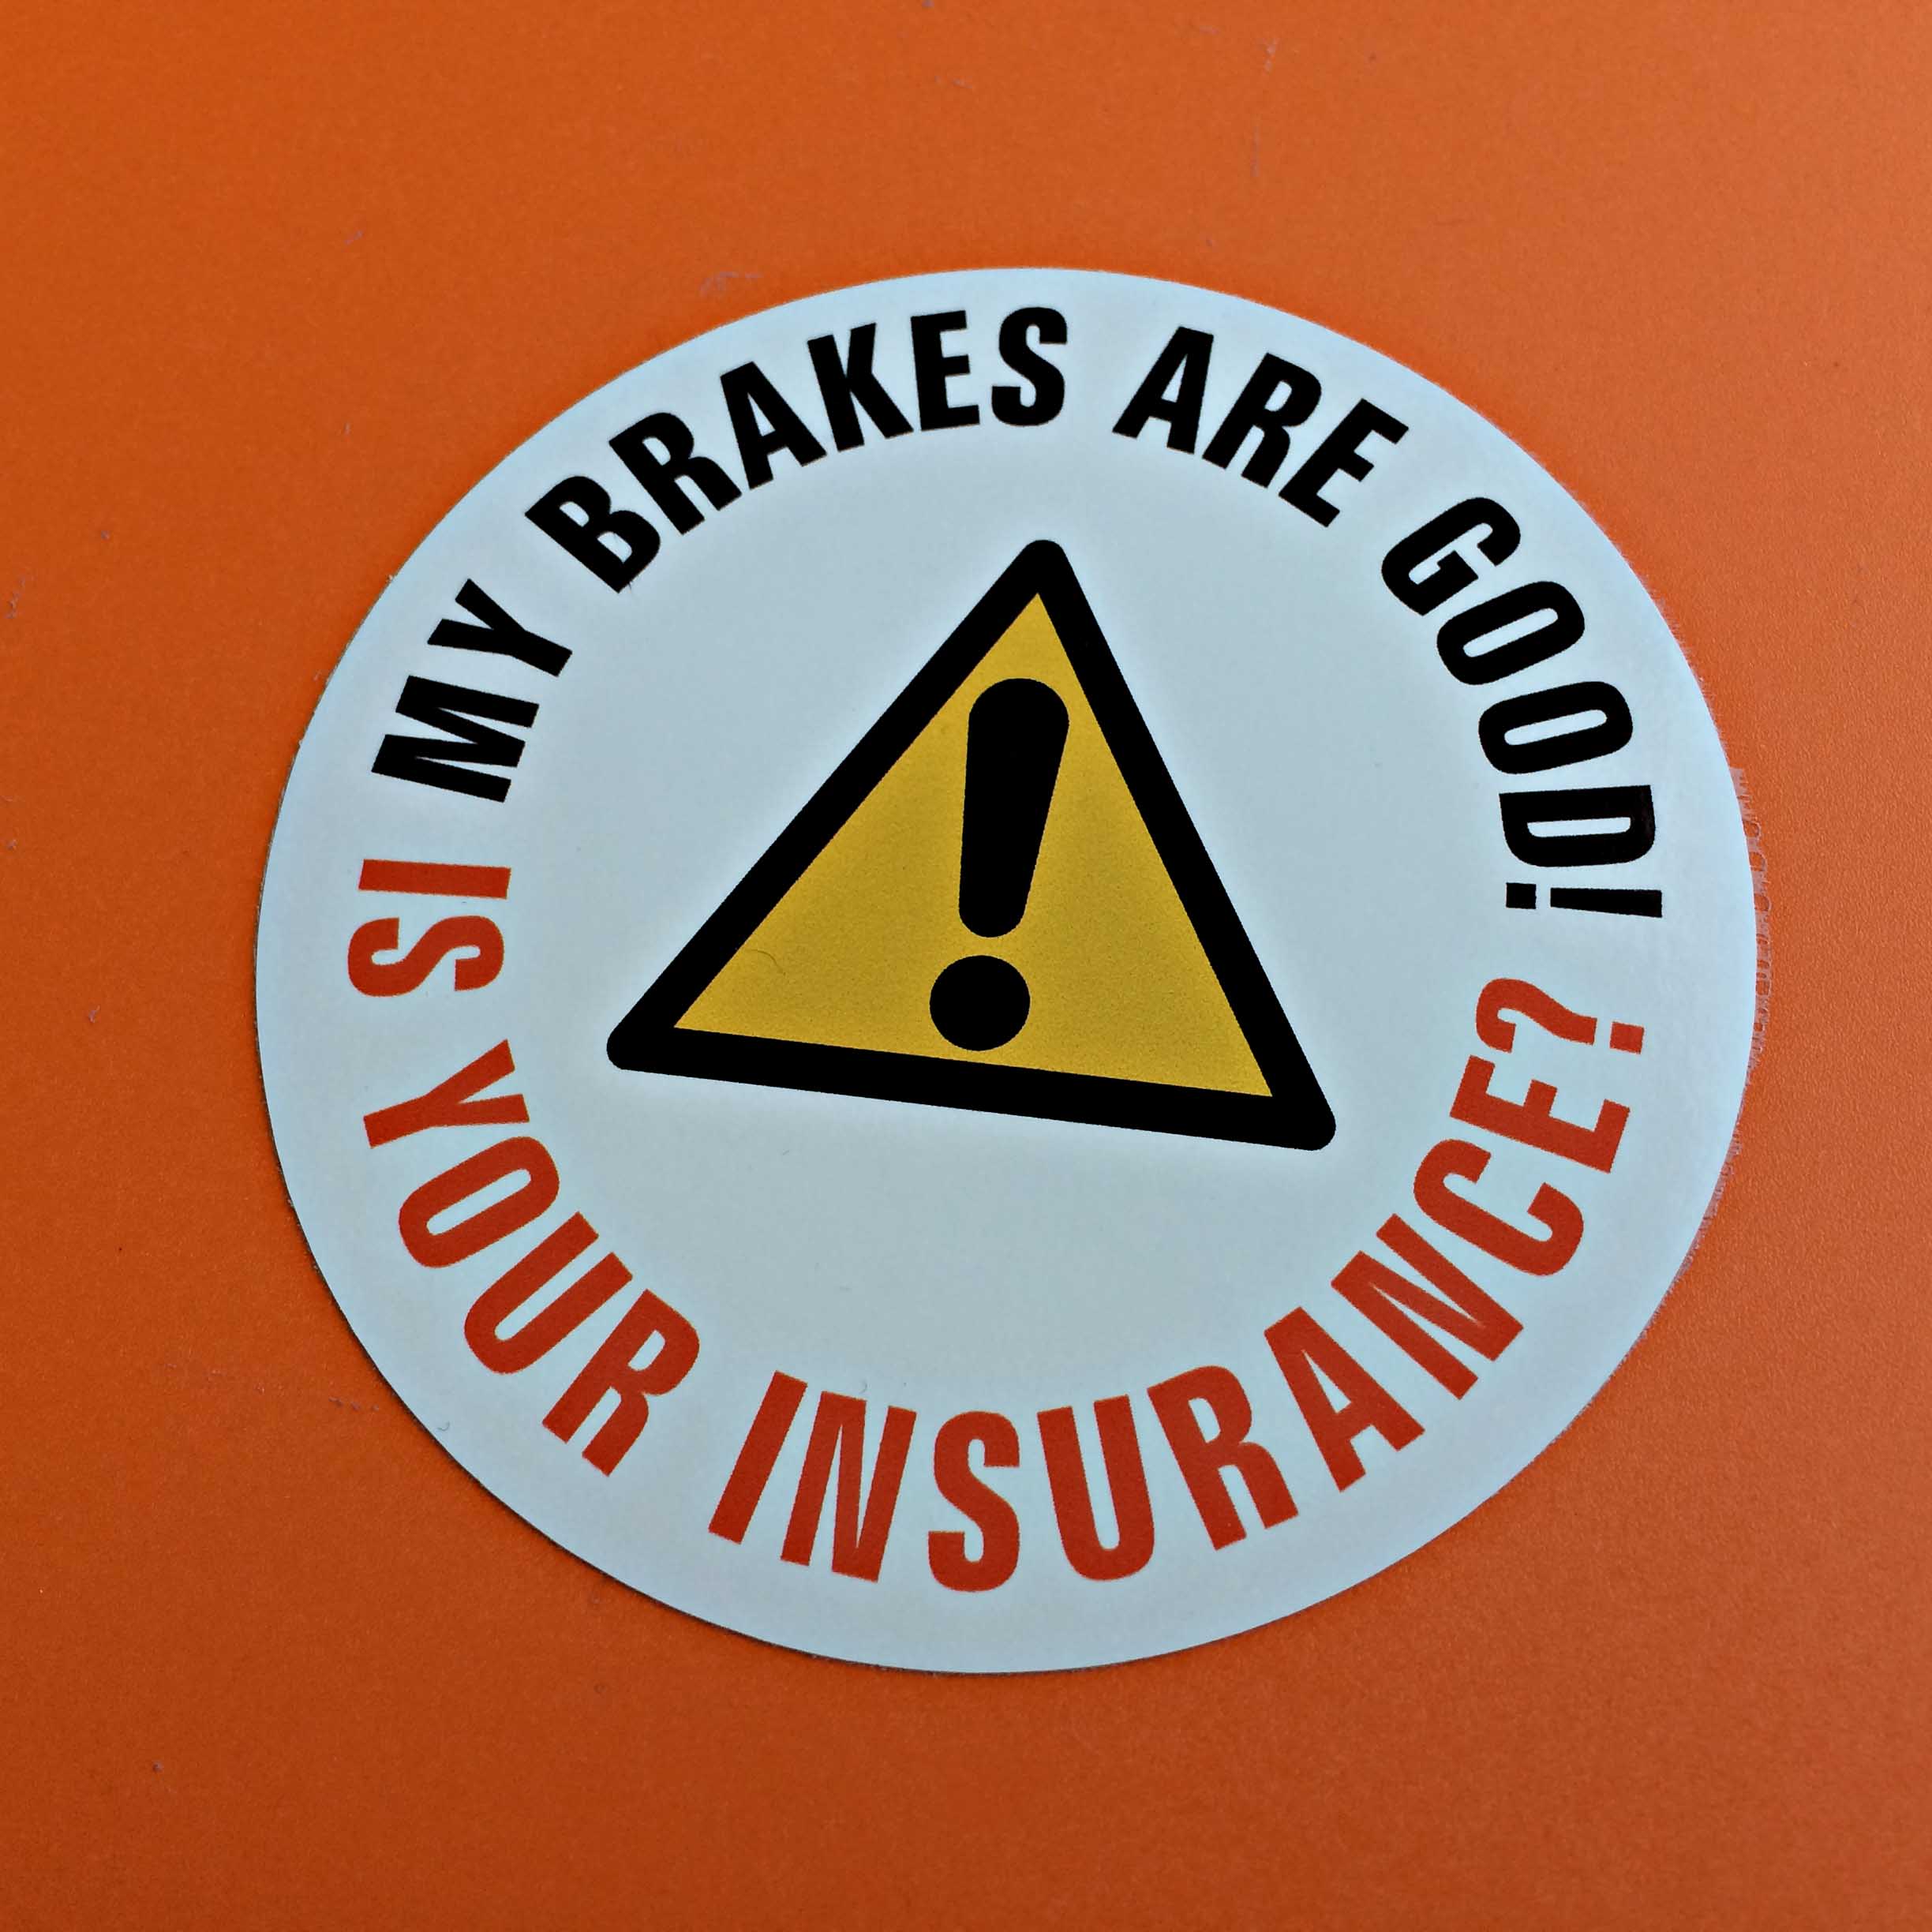 MY BRAKES ARE GOOD STICKER. My Brakes Are Good! in black lettering Is Your Insurance? in red lettering. Centre of the circle is a yellow hazard warning triangle.